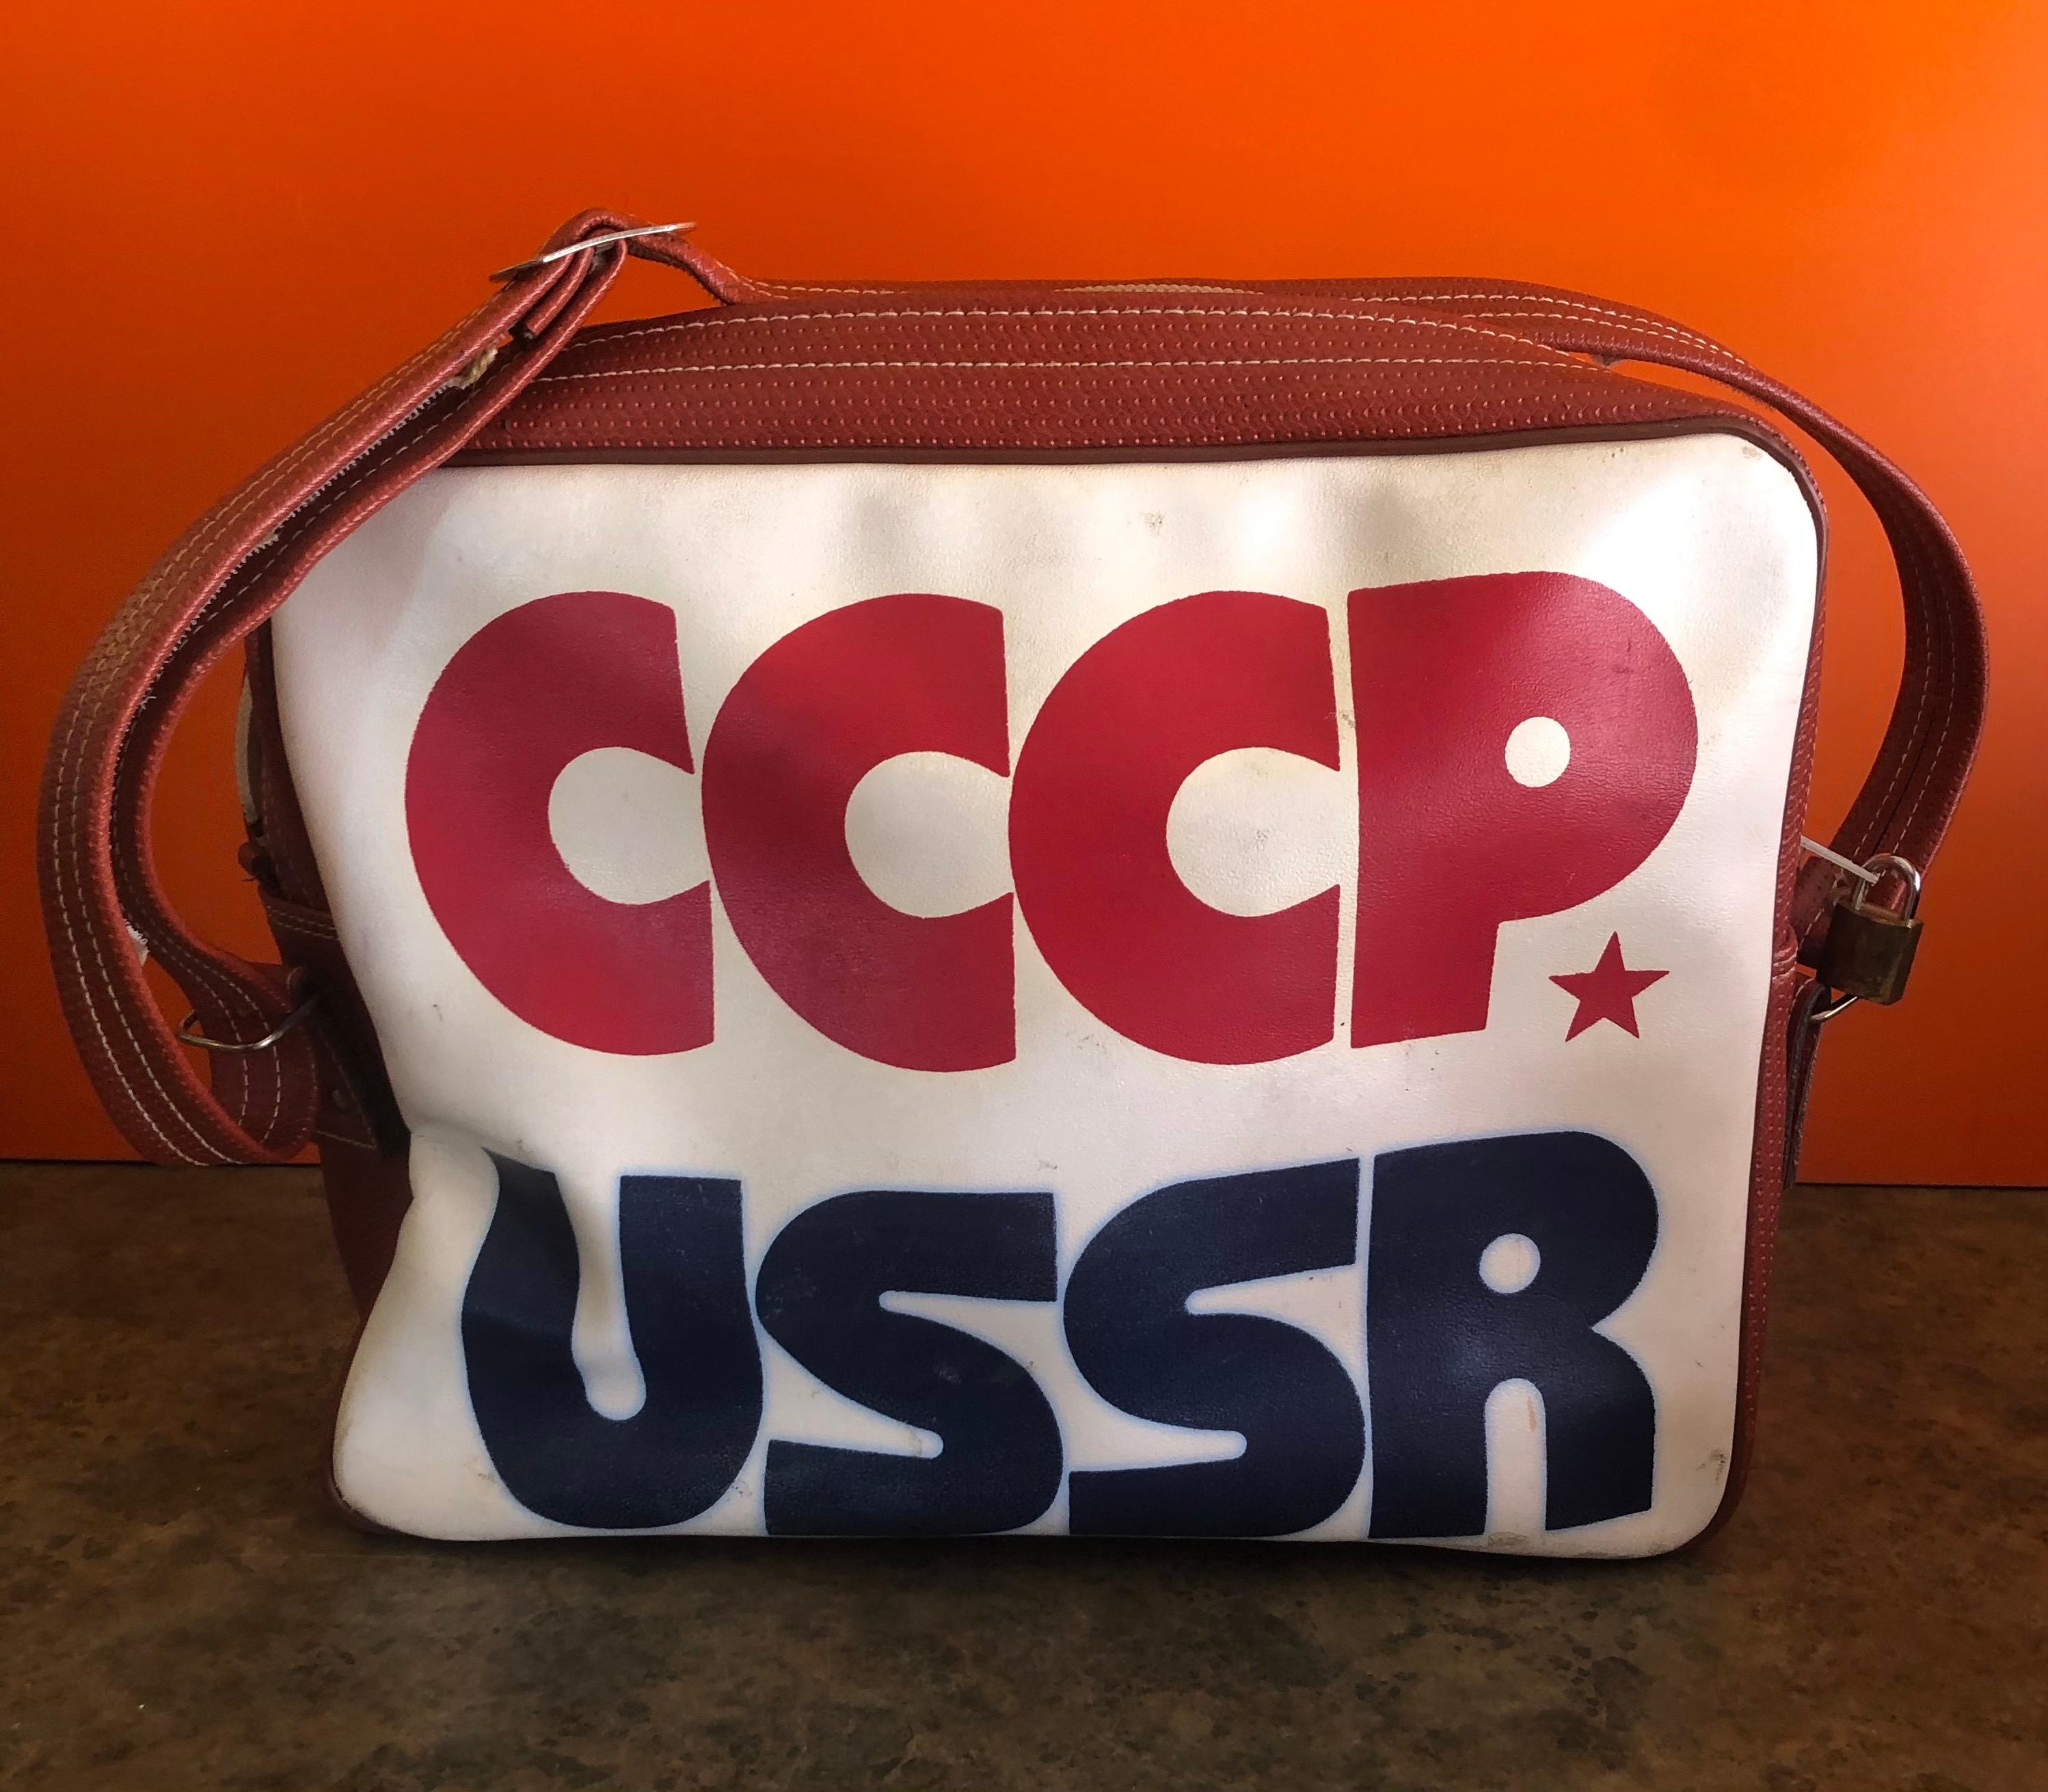 Authentic CCCP USSR Olympic Naugahyde sports bag, circa 1980s

The bag is authentic with the original Russian label intact. The piece is believed to be designed by Adidas for the 1984 games in Sarajevo?, Yugoslavia and is quite rare. 

The piece